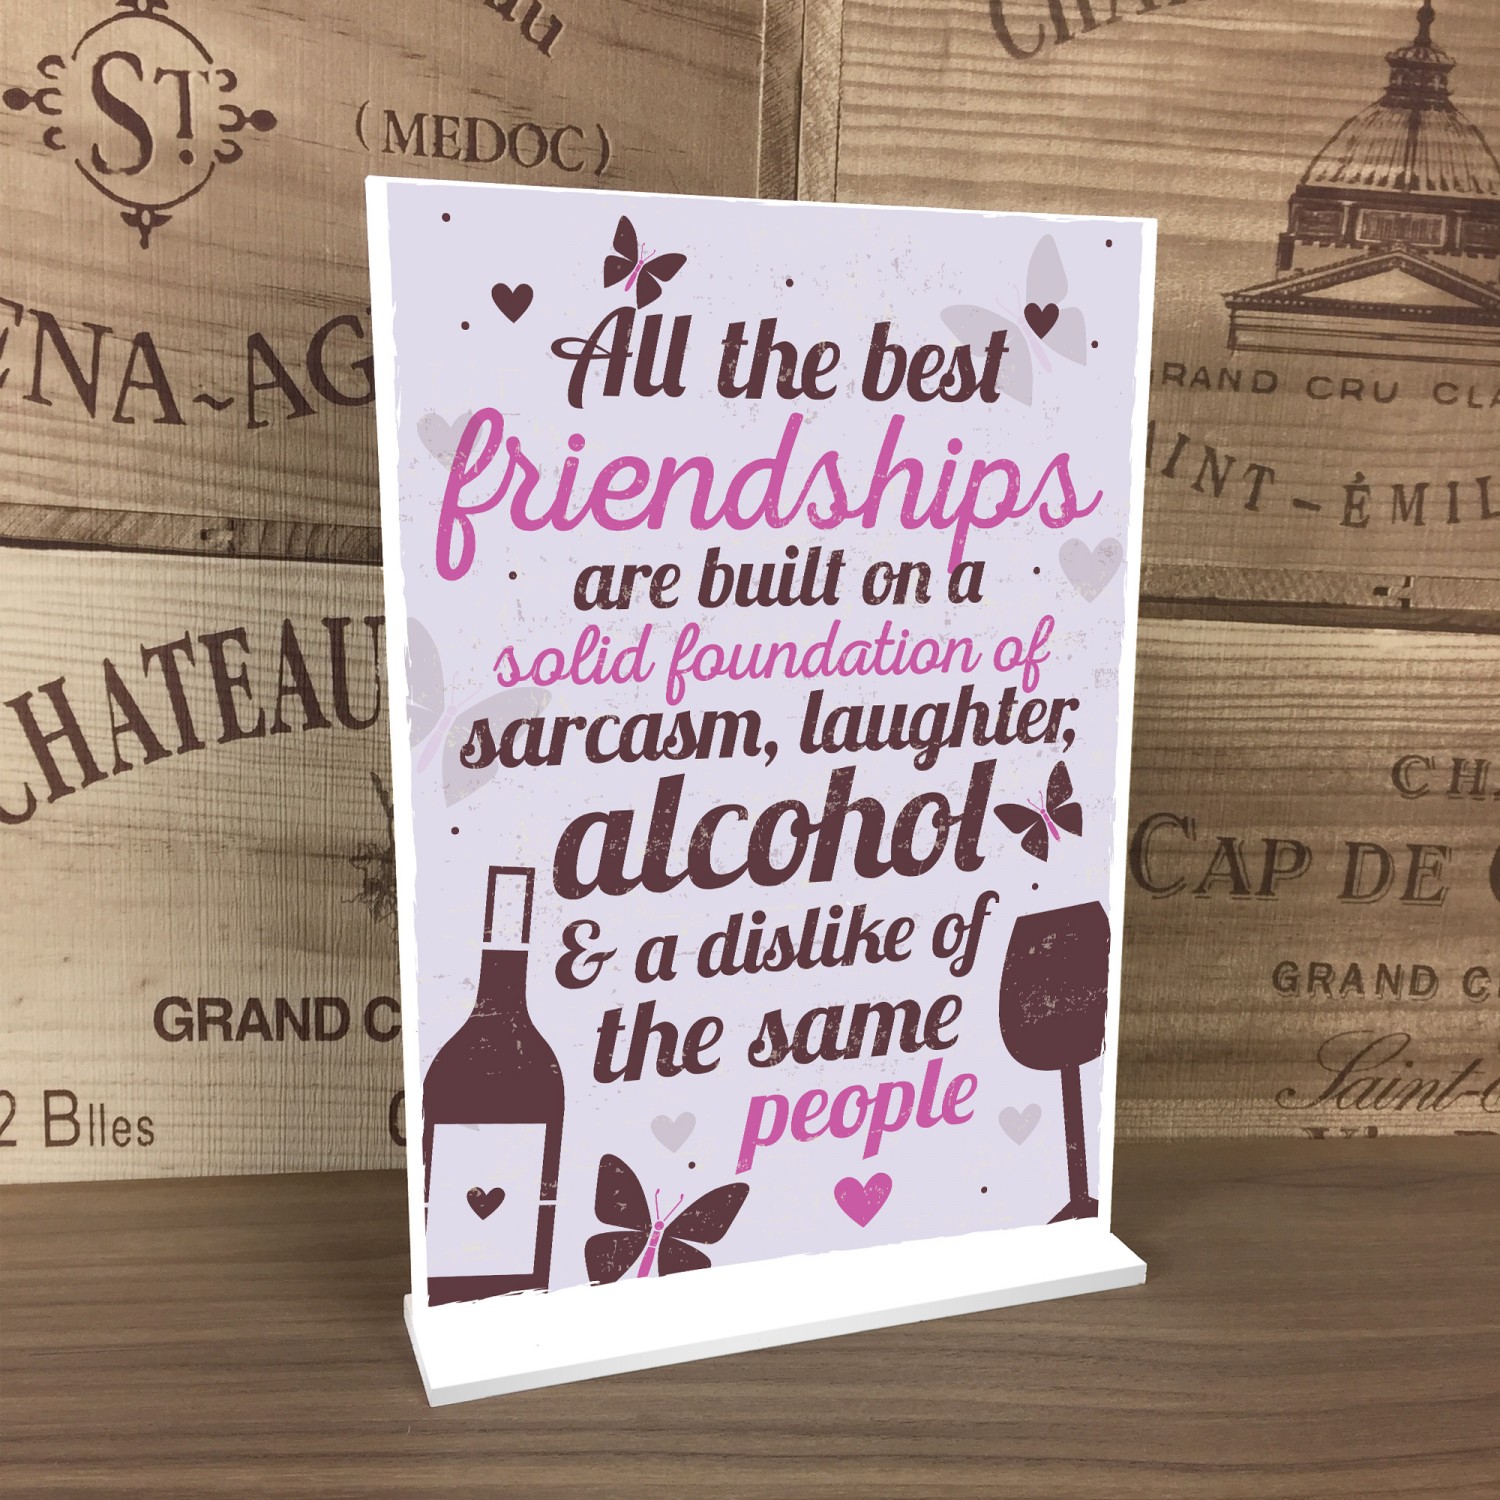 Laughter Alcohol & A Dislike Of The Same People Novelty Hanging Wooden Plaque Best Friends Funny Gift Sign Red Ocean All The Best Friendships Are Built On A Solid Foundation Of Sarcasm 